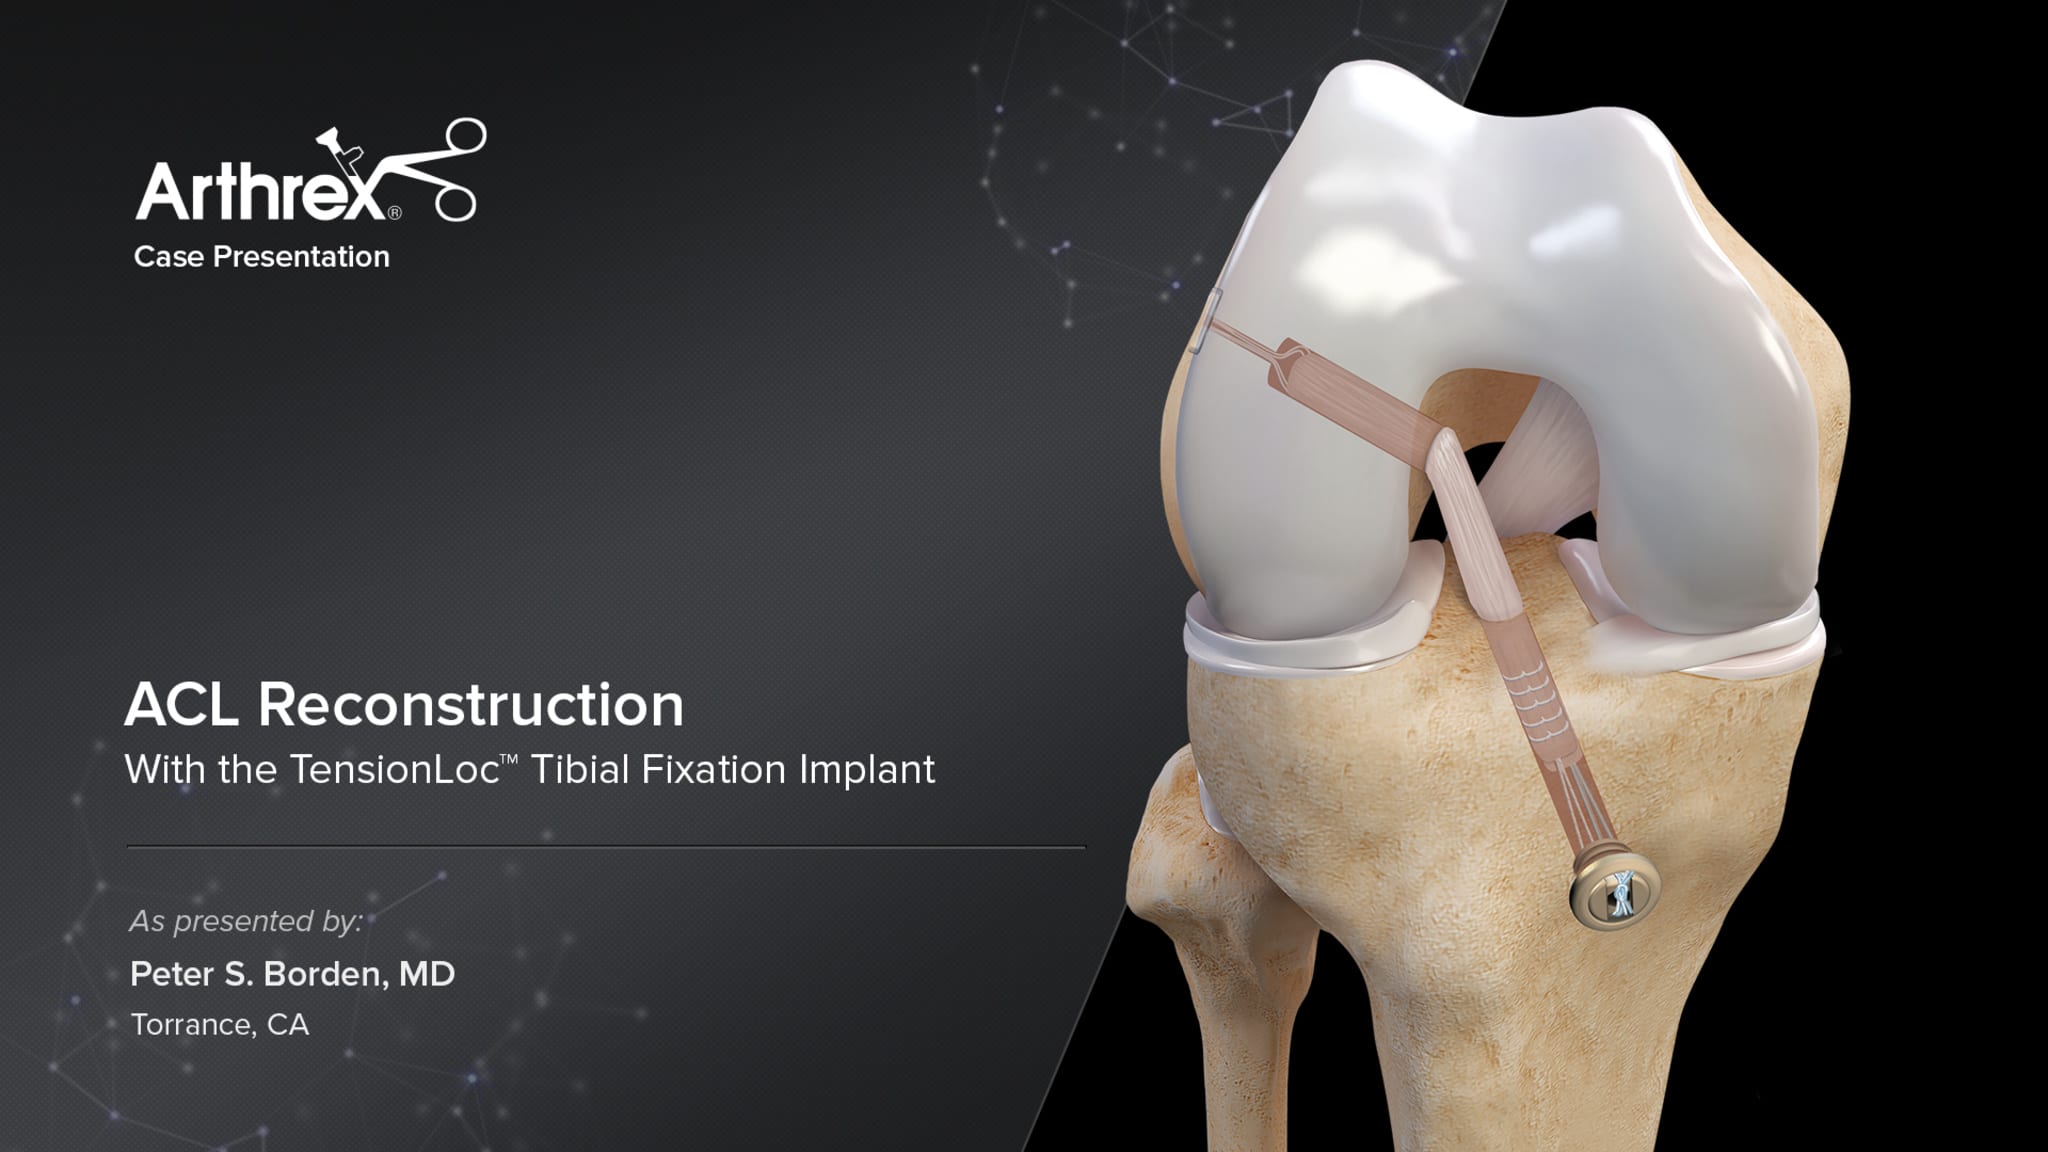 ACL Reconstruction With the TensionLoc™ Tibial Fixation Implant